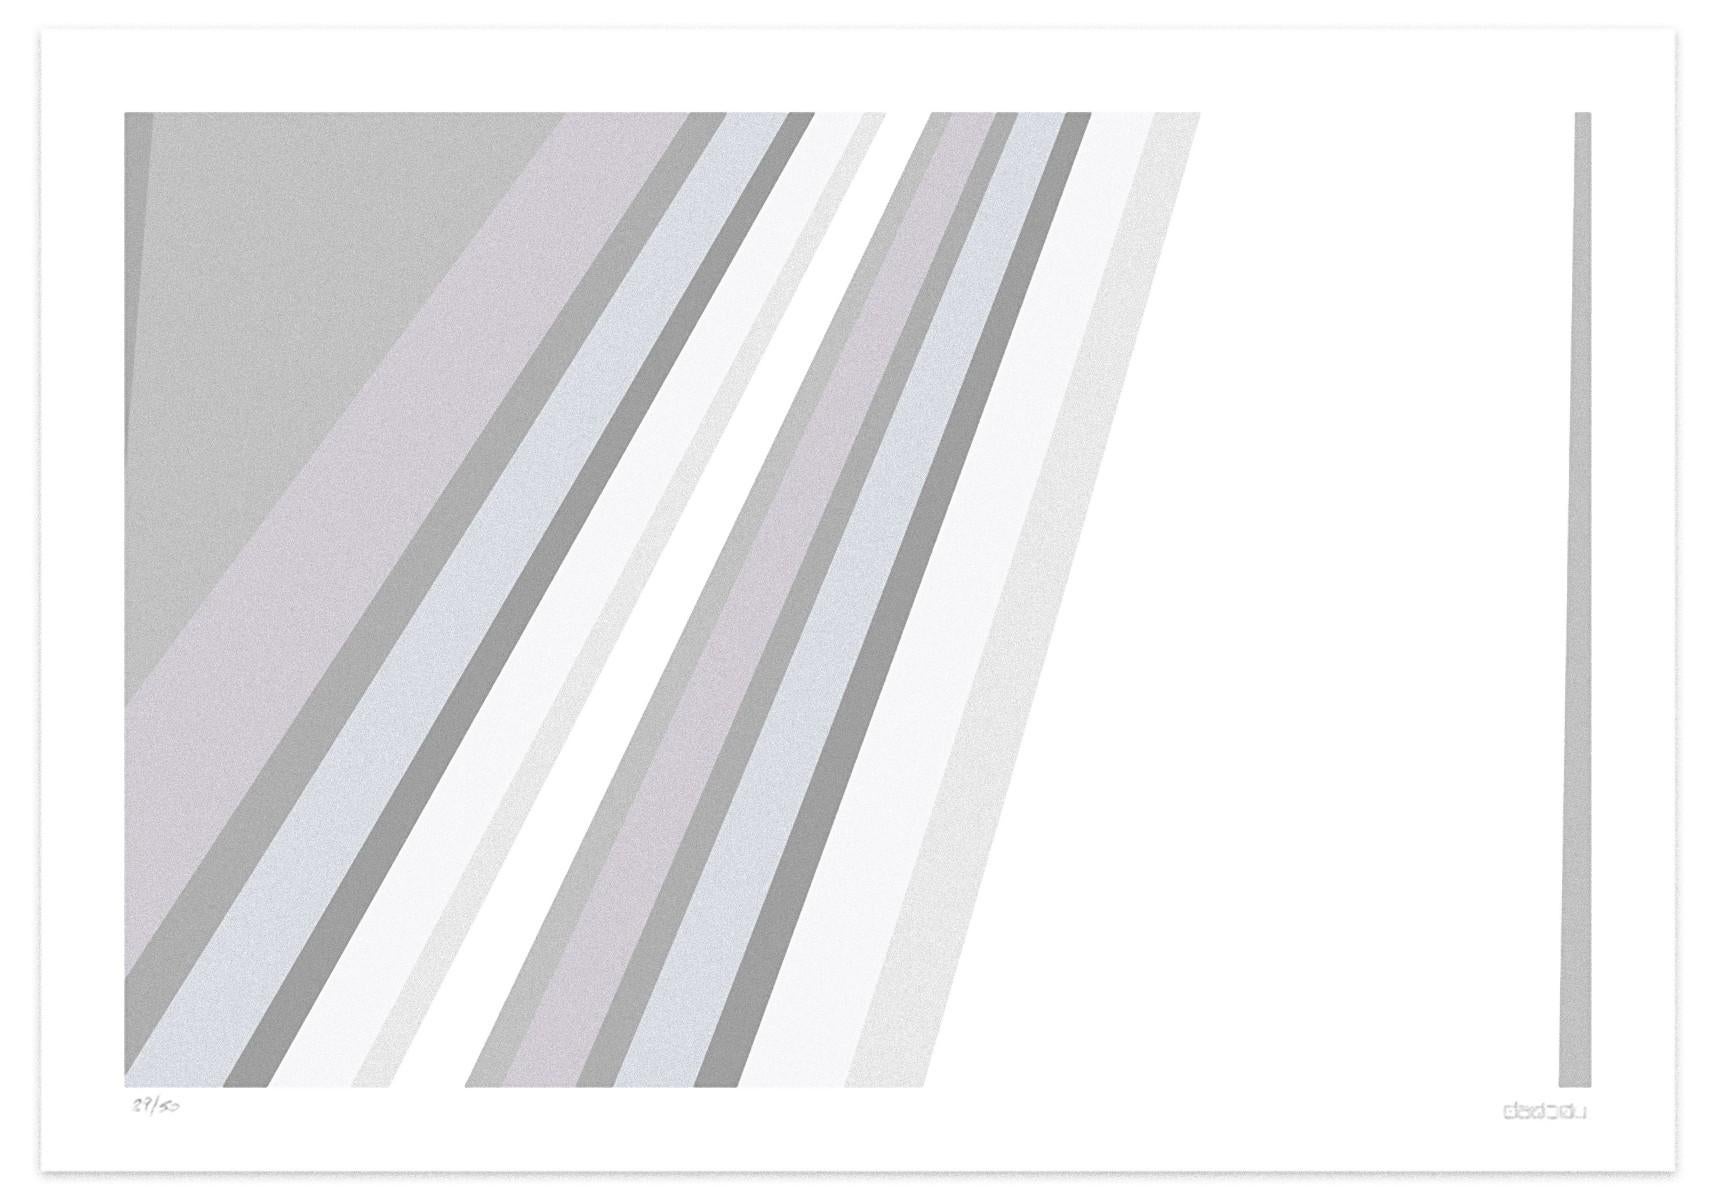 Free Fall  is an enchanting  giclée print realized by the contemporary artist  Dadodu in 2018.

This original artwork represents an abstract composition with white and gray stripes in diagonal.

Hand-signed on the lower right corner "Dadodu" and